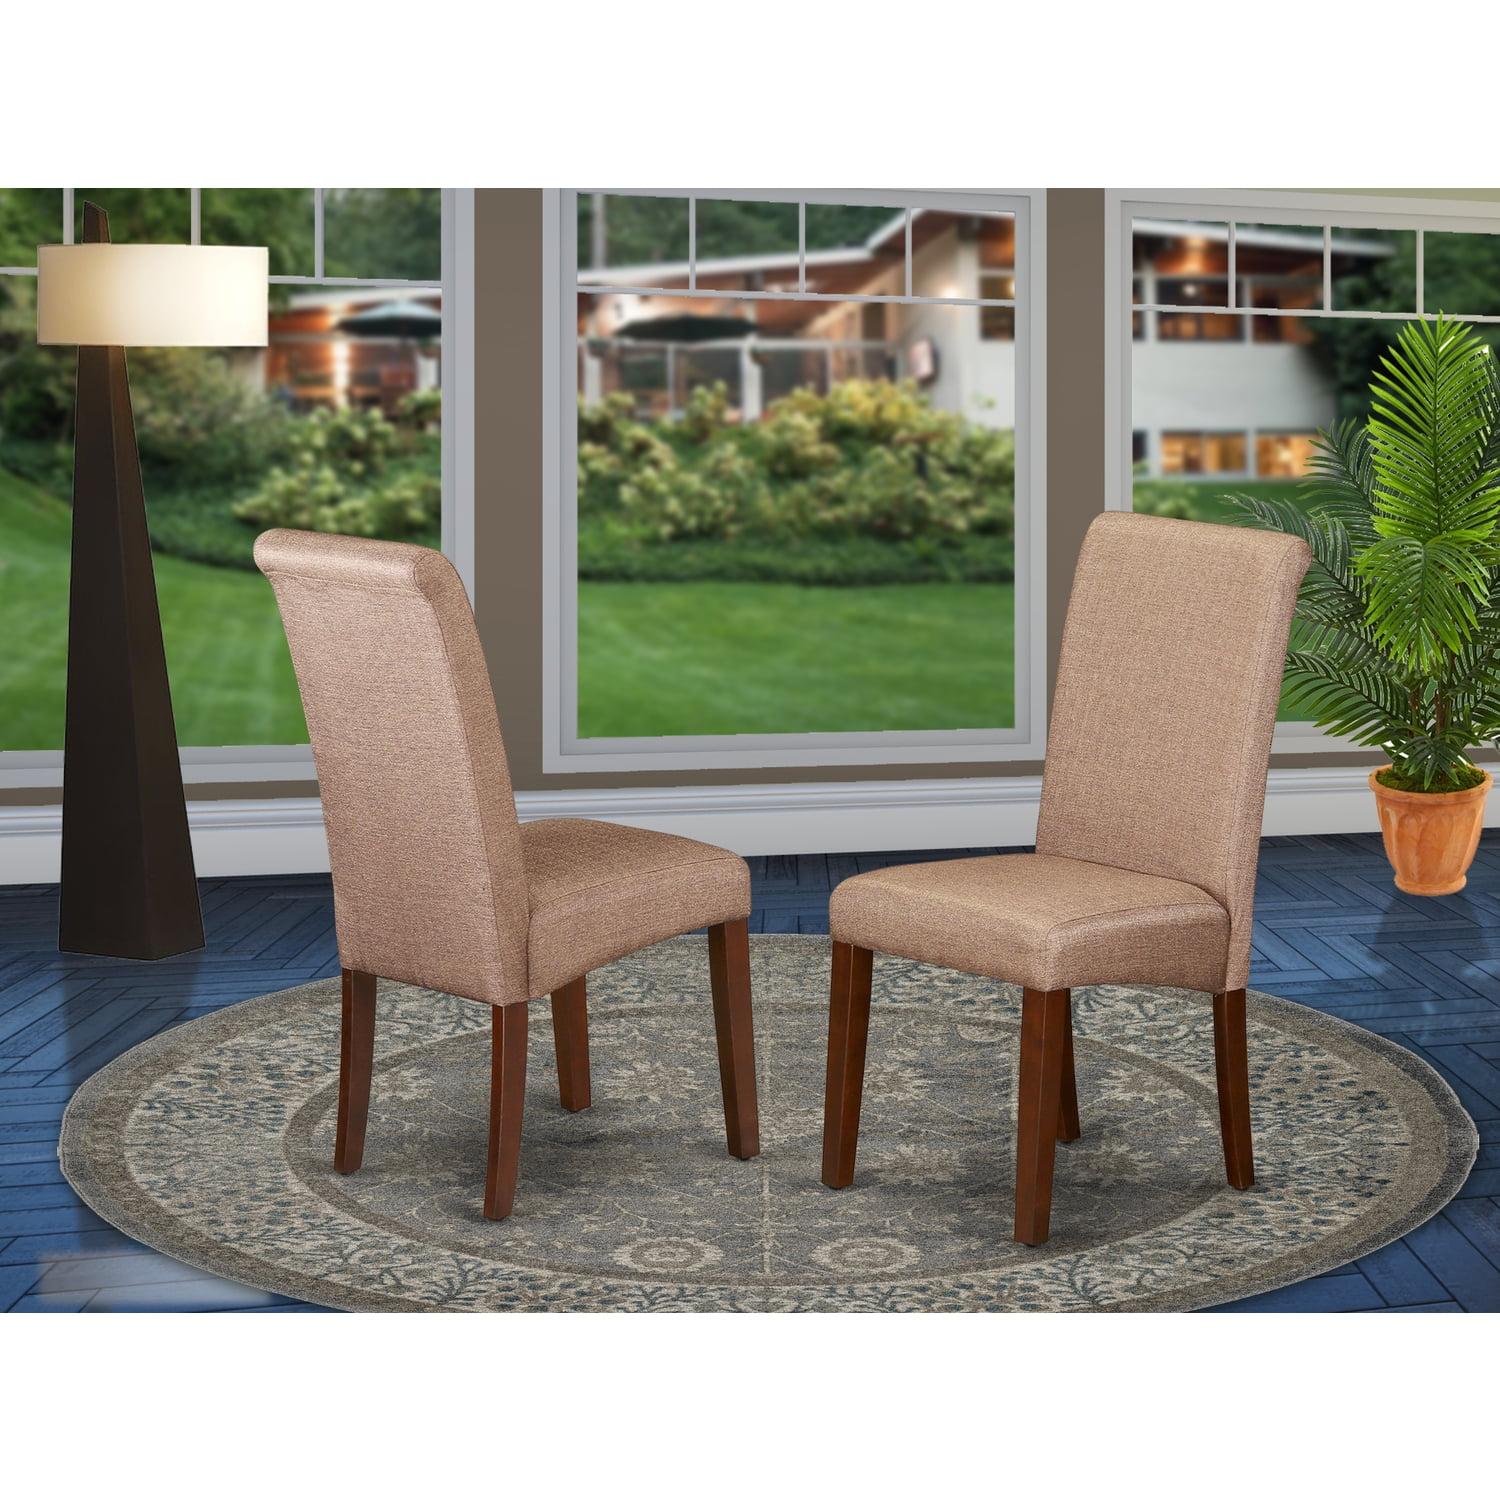 Elegant Brown Linen and Mahogany Wood High Parsons Side Chair